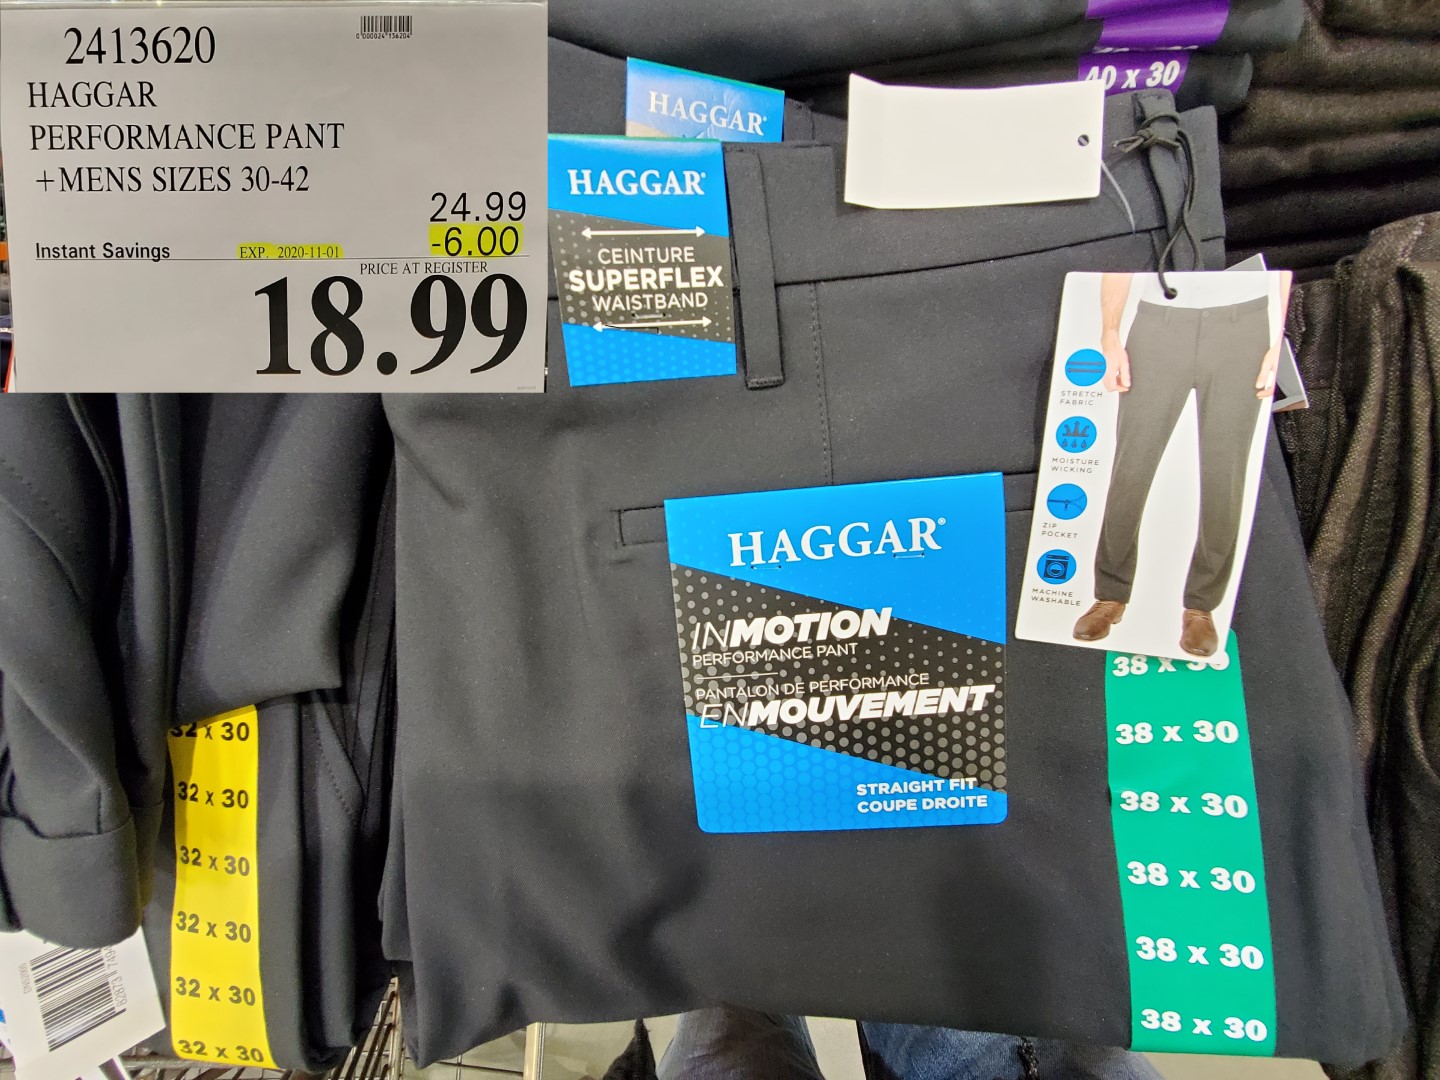 2413620 HAGGAR PERFORMANCE PANT MENS SIZES 30 42 6 00 INSTANT SAVINGS  EXPIRES ON 2020 11 01 18 99 - Costco East Fan Blog